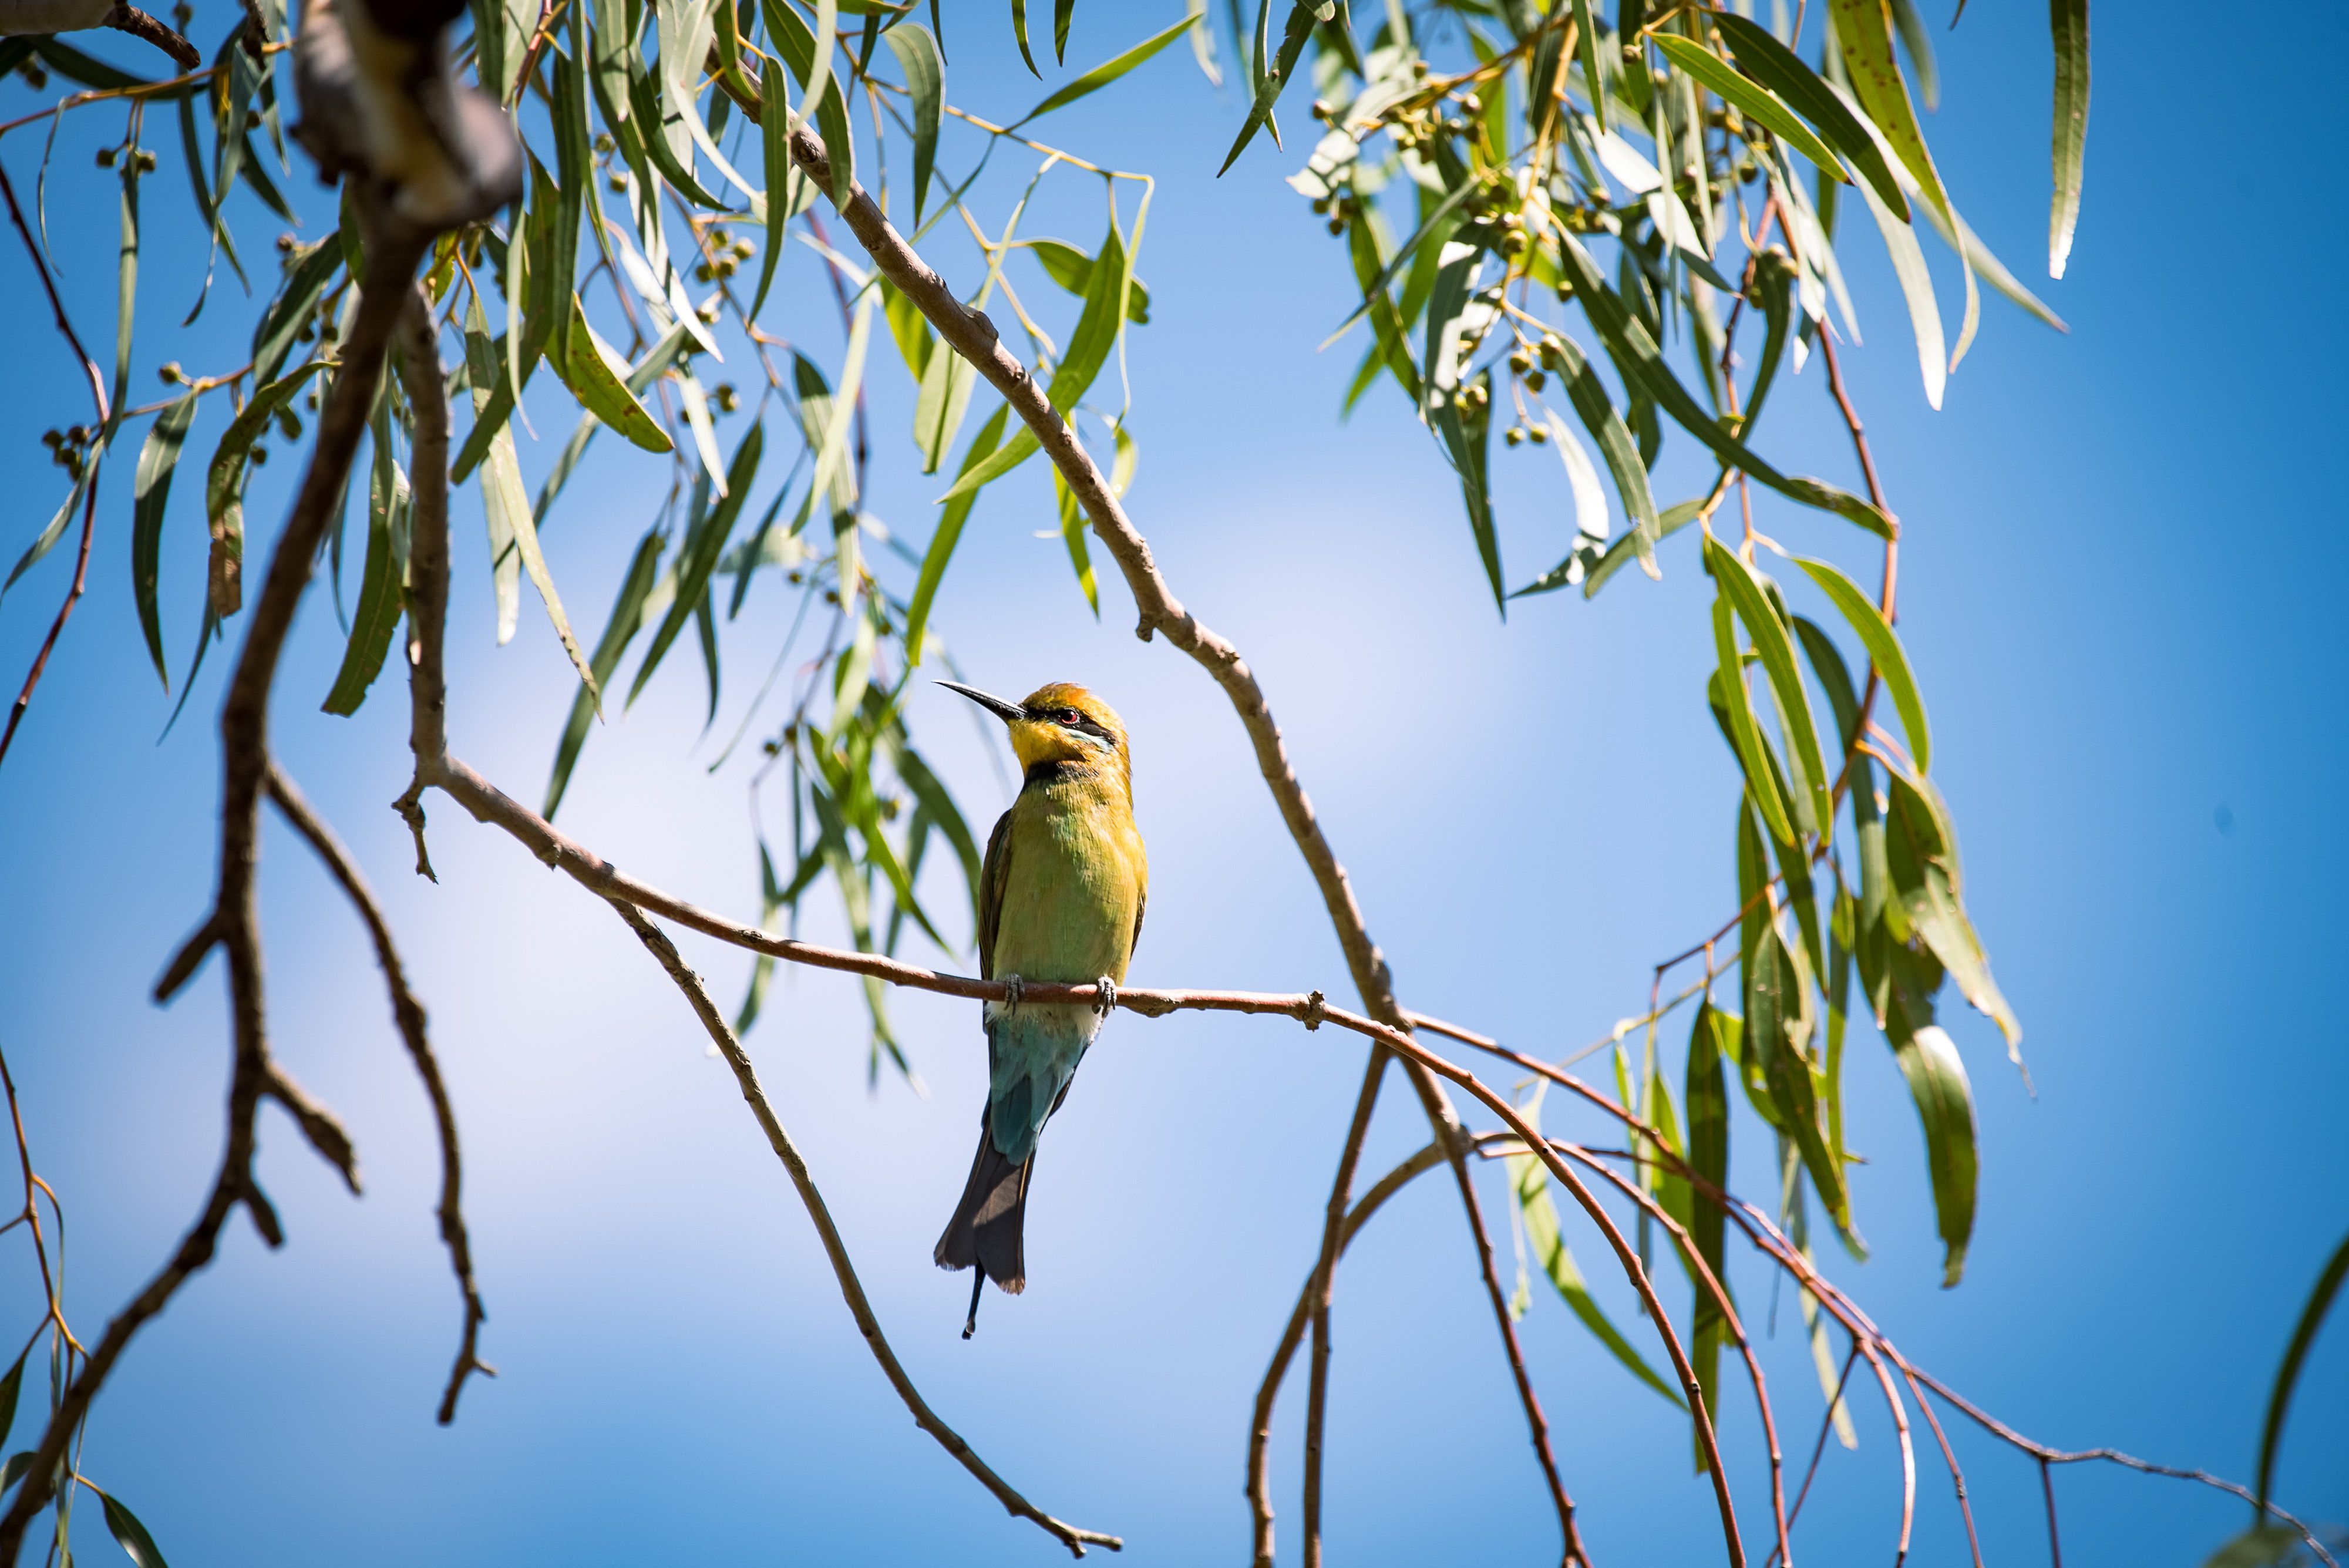 A view from below of a small bird in a eucalyptus tree.